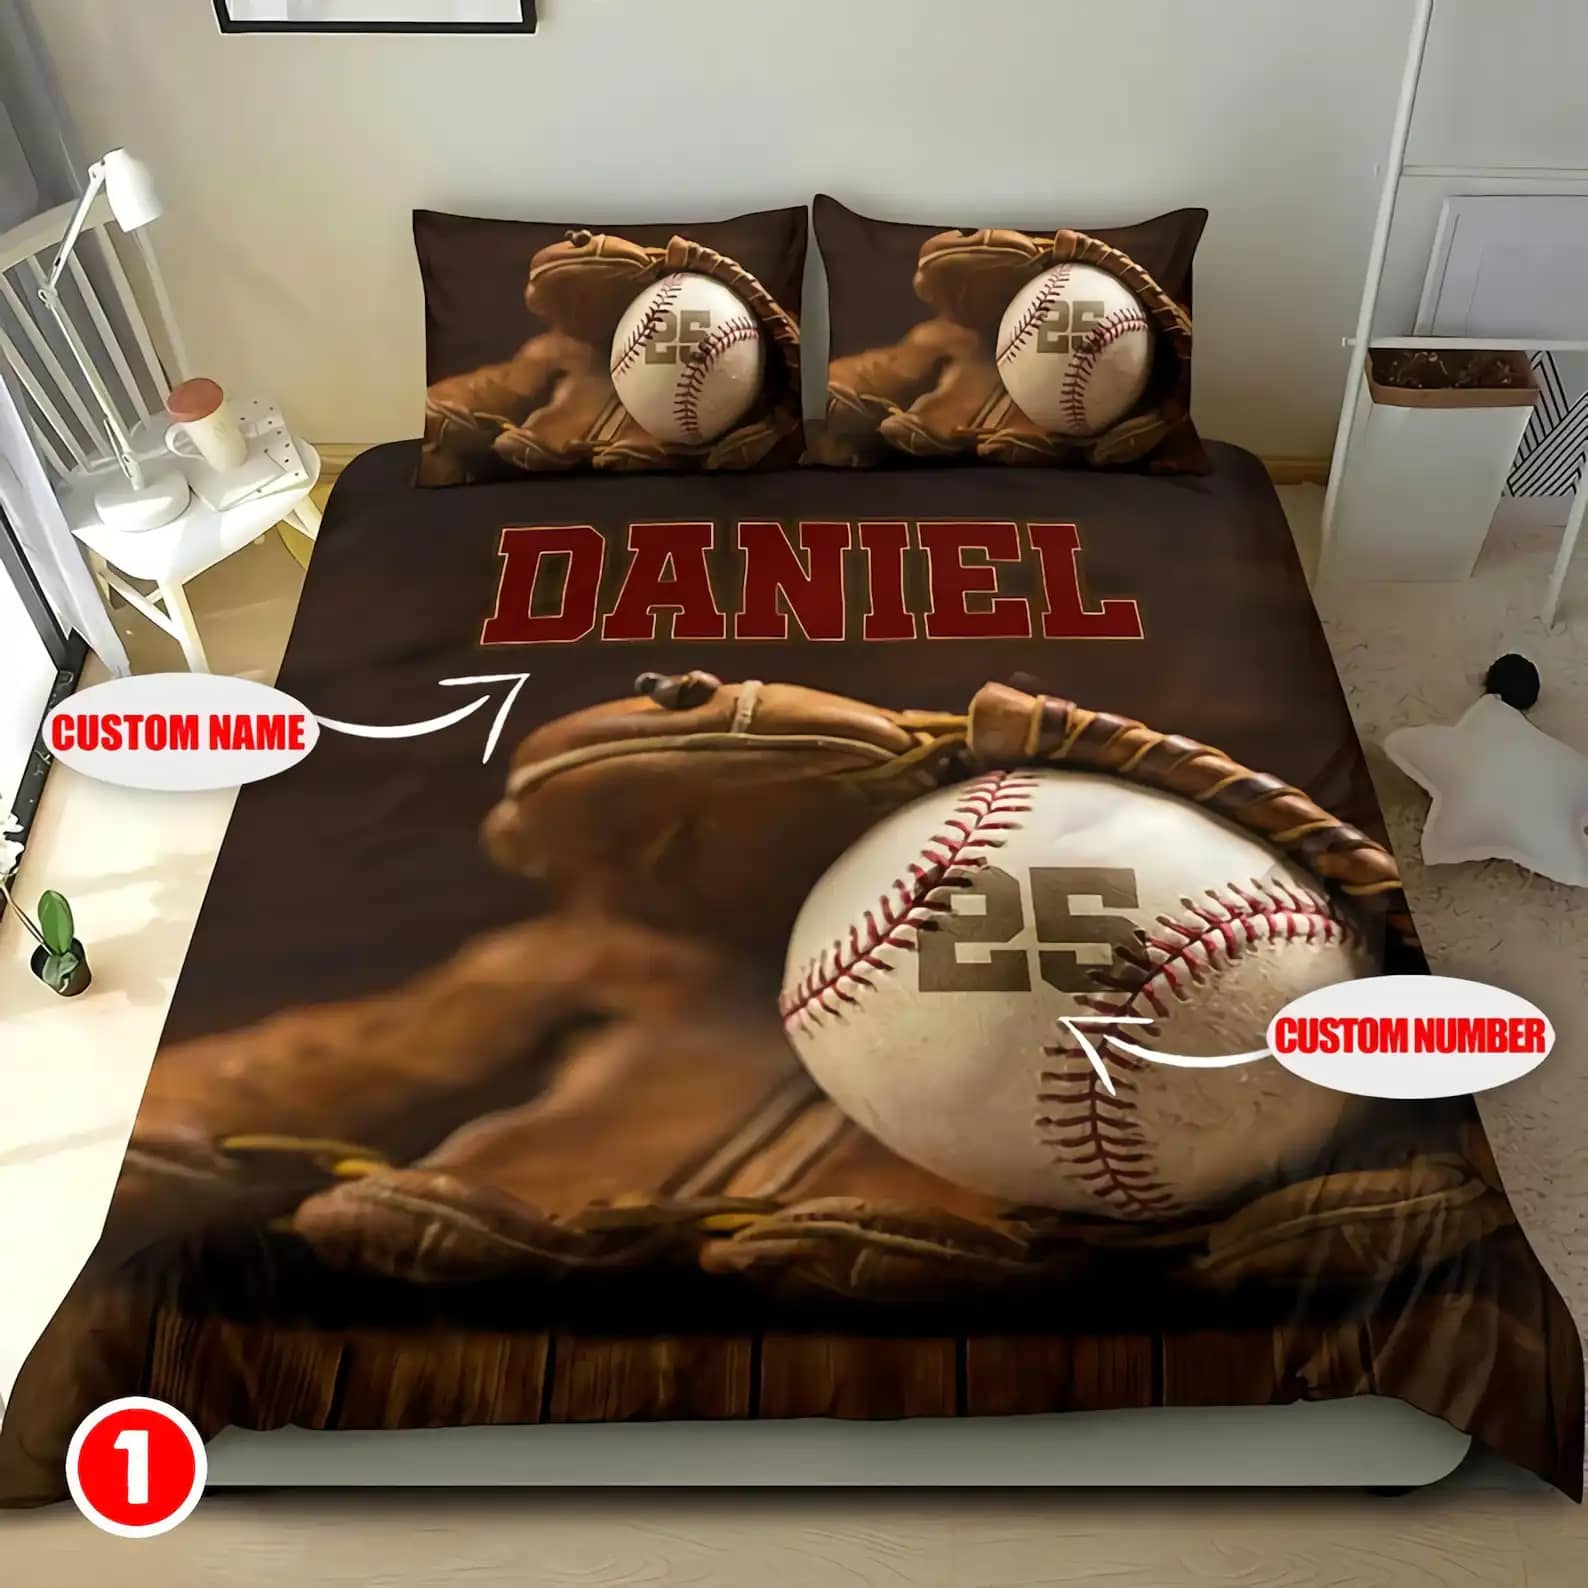 Personalized Baseball Custom Name Quilt Bedding Sets